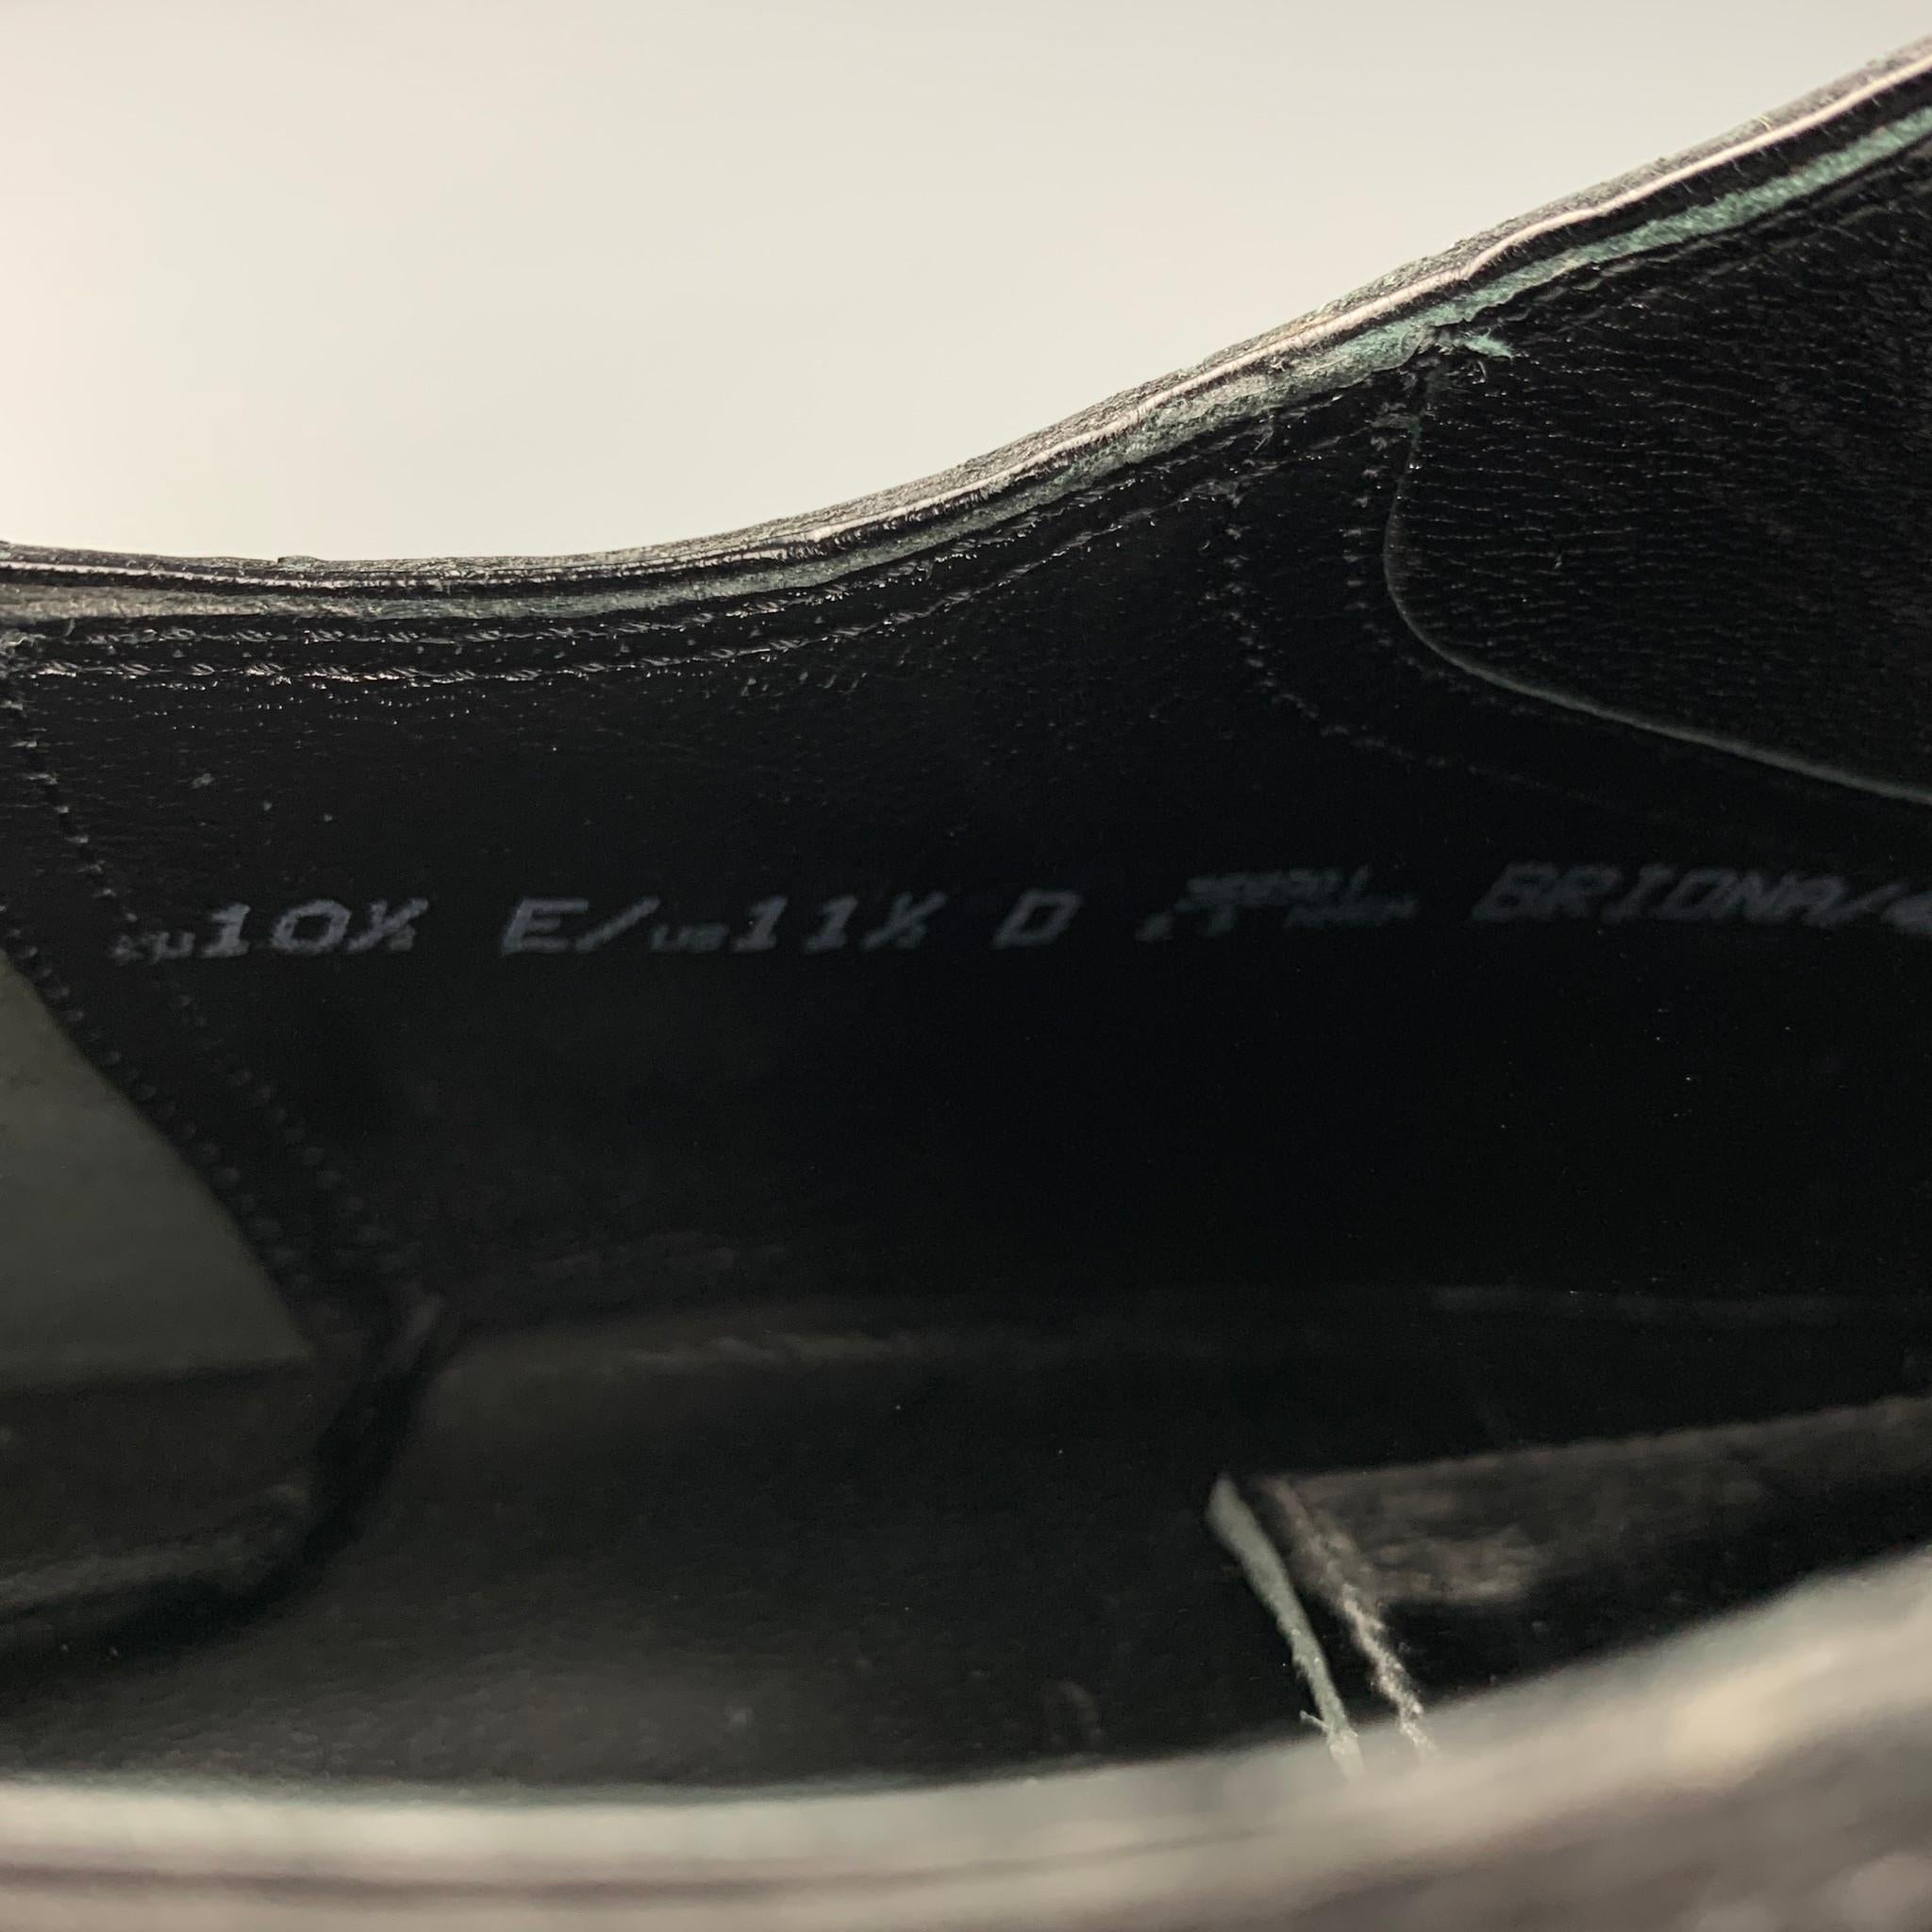 BALLY Size 11.5 Black Perforated Patent Leather Lace Up Shoes 1